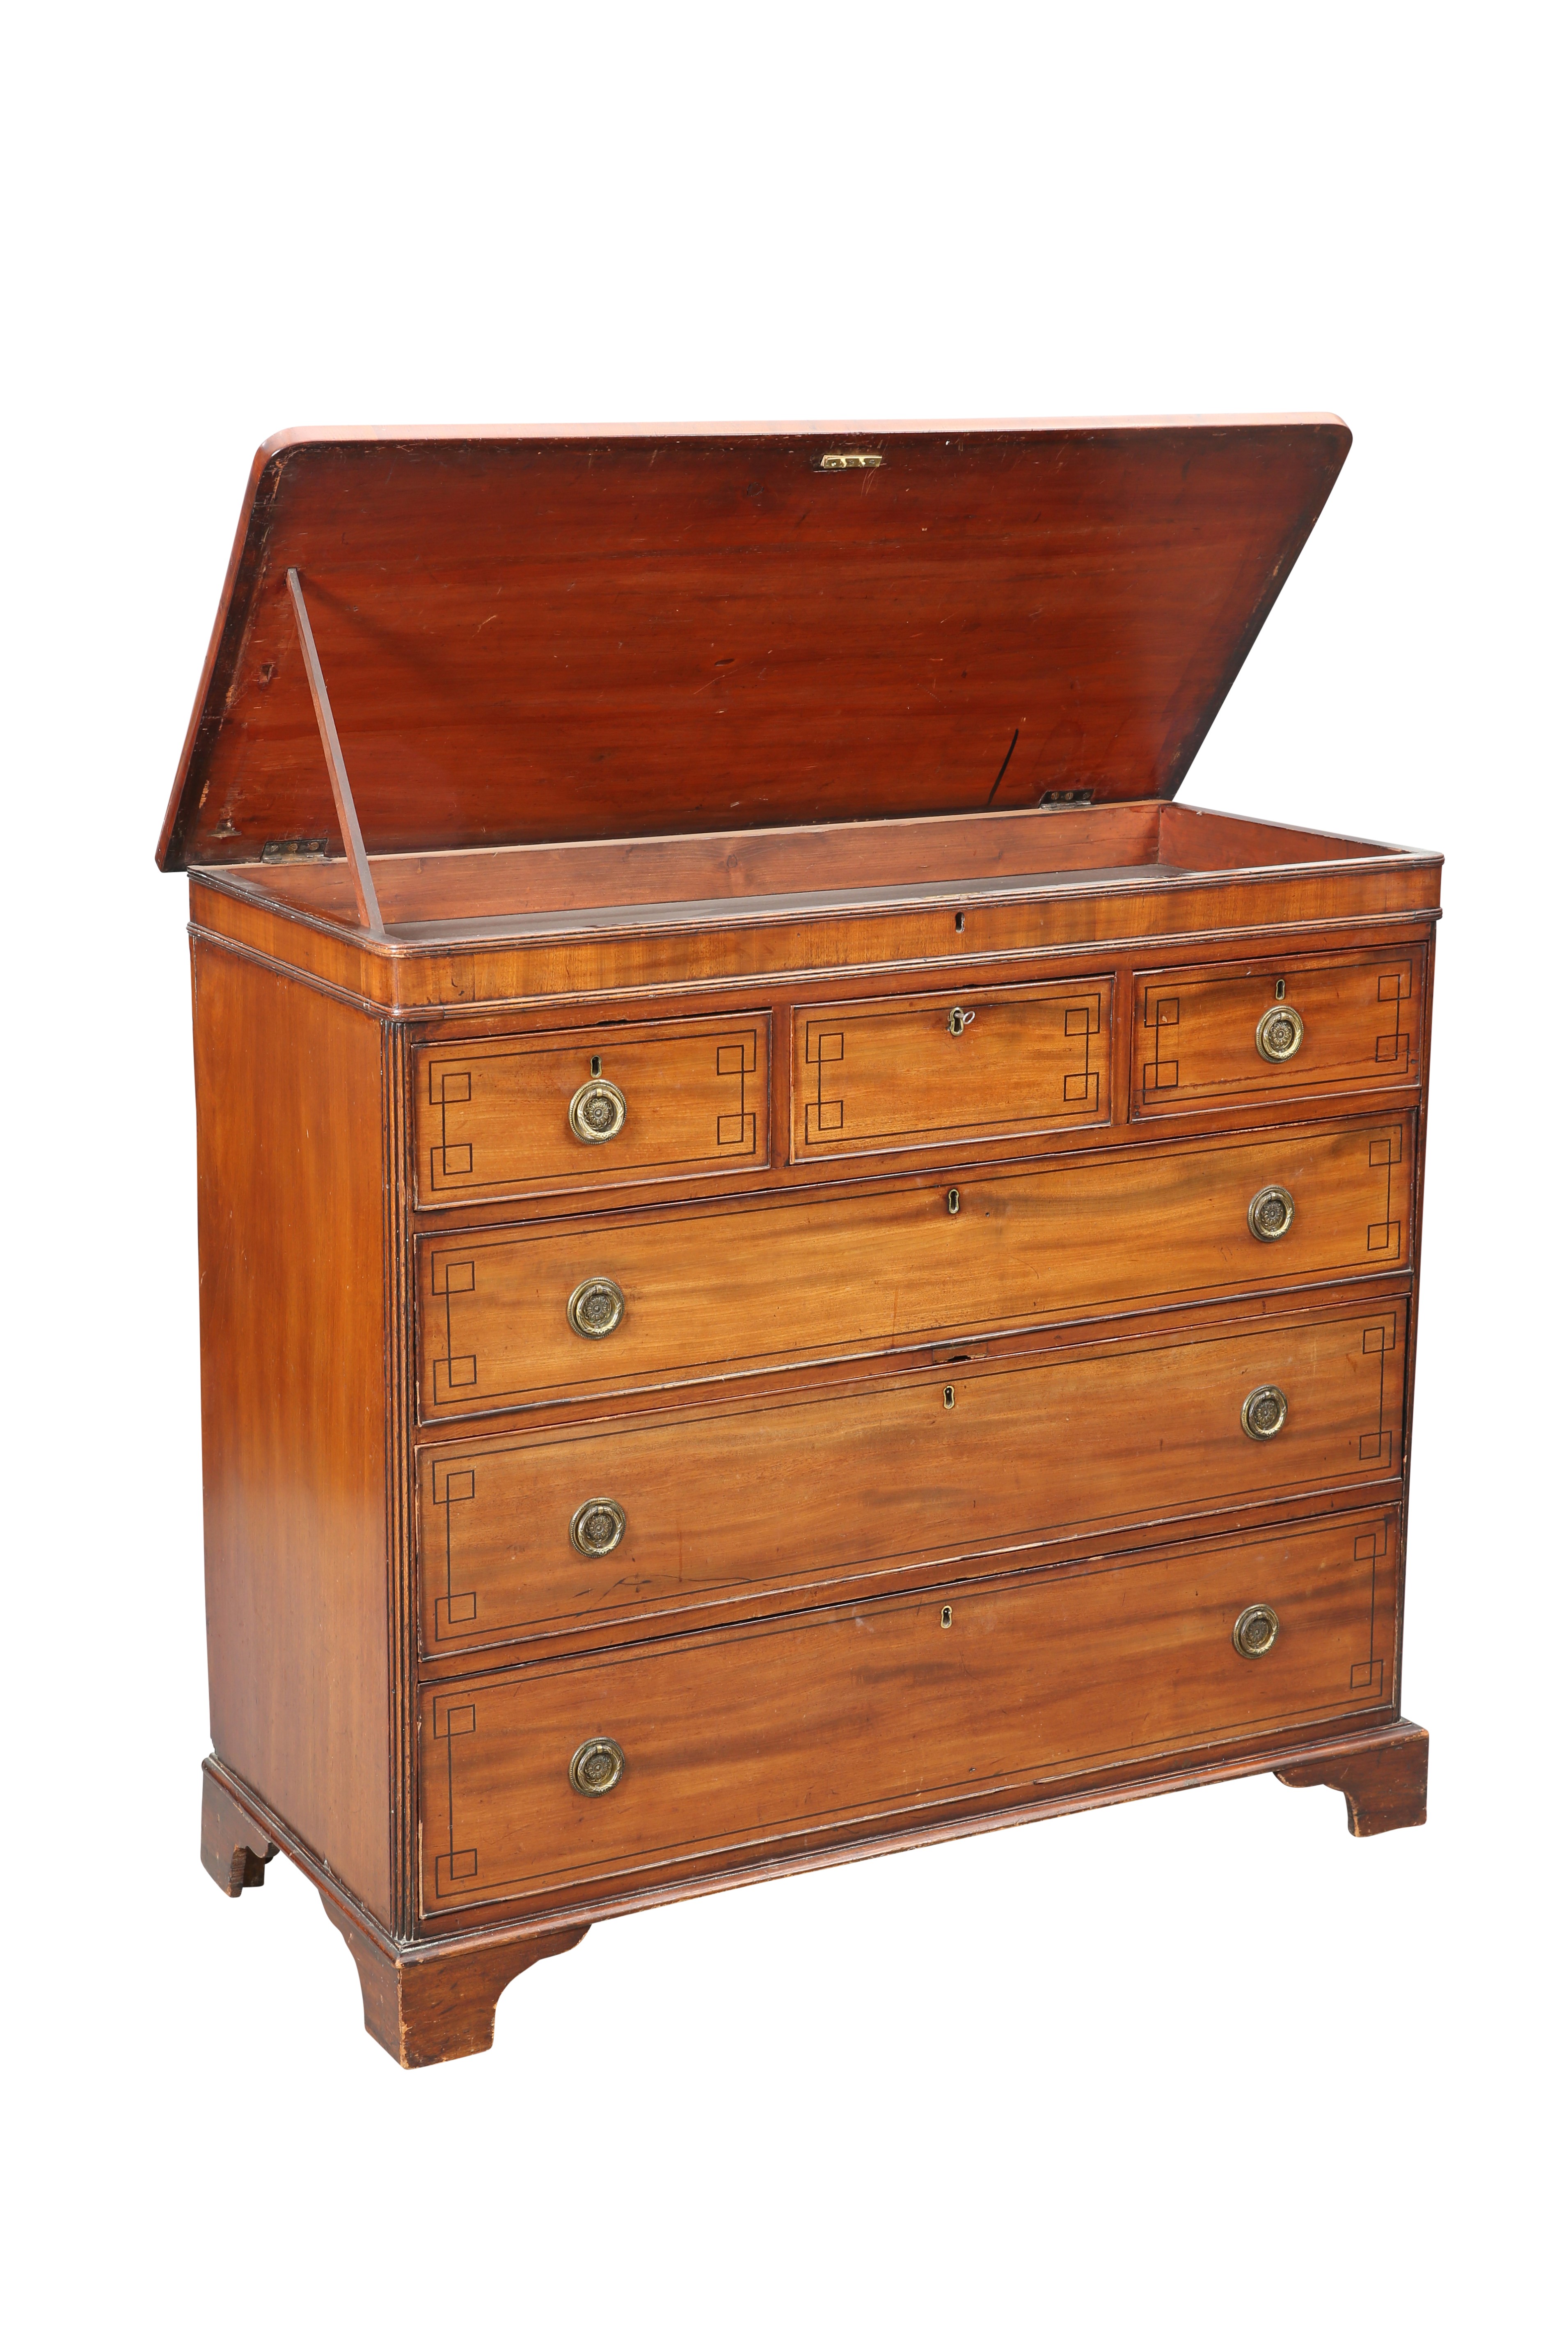 A REGENCY MAHOGANY CHEST OF DRAWERS WITH HINGED TOP